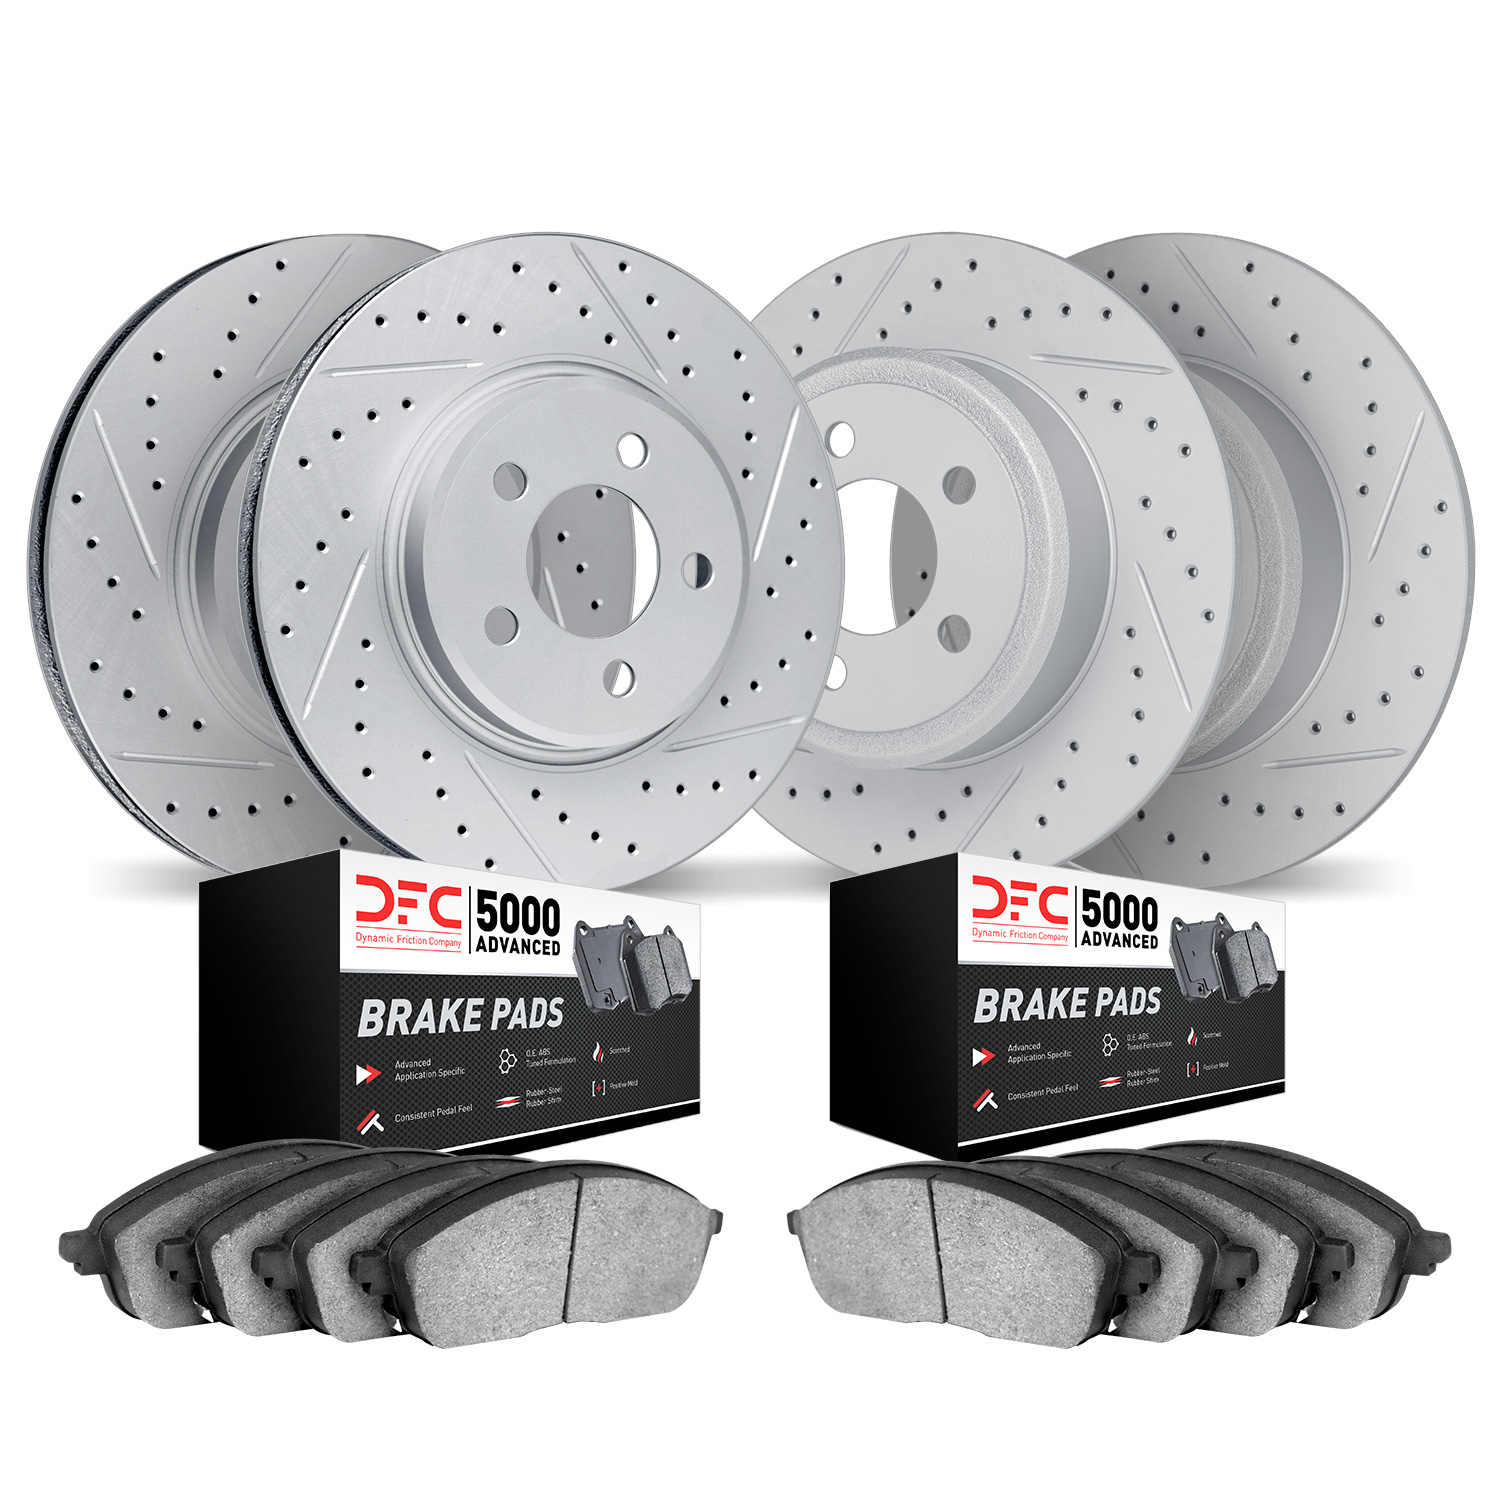 2504-54213 Geoperformance Drilled/Slotted Rotors w/5000 Advanced Brake Pads Kit, 2017-2019 Ford/Lincoln/Mercury/Mazda, Position: